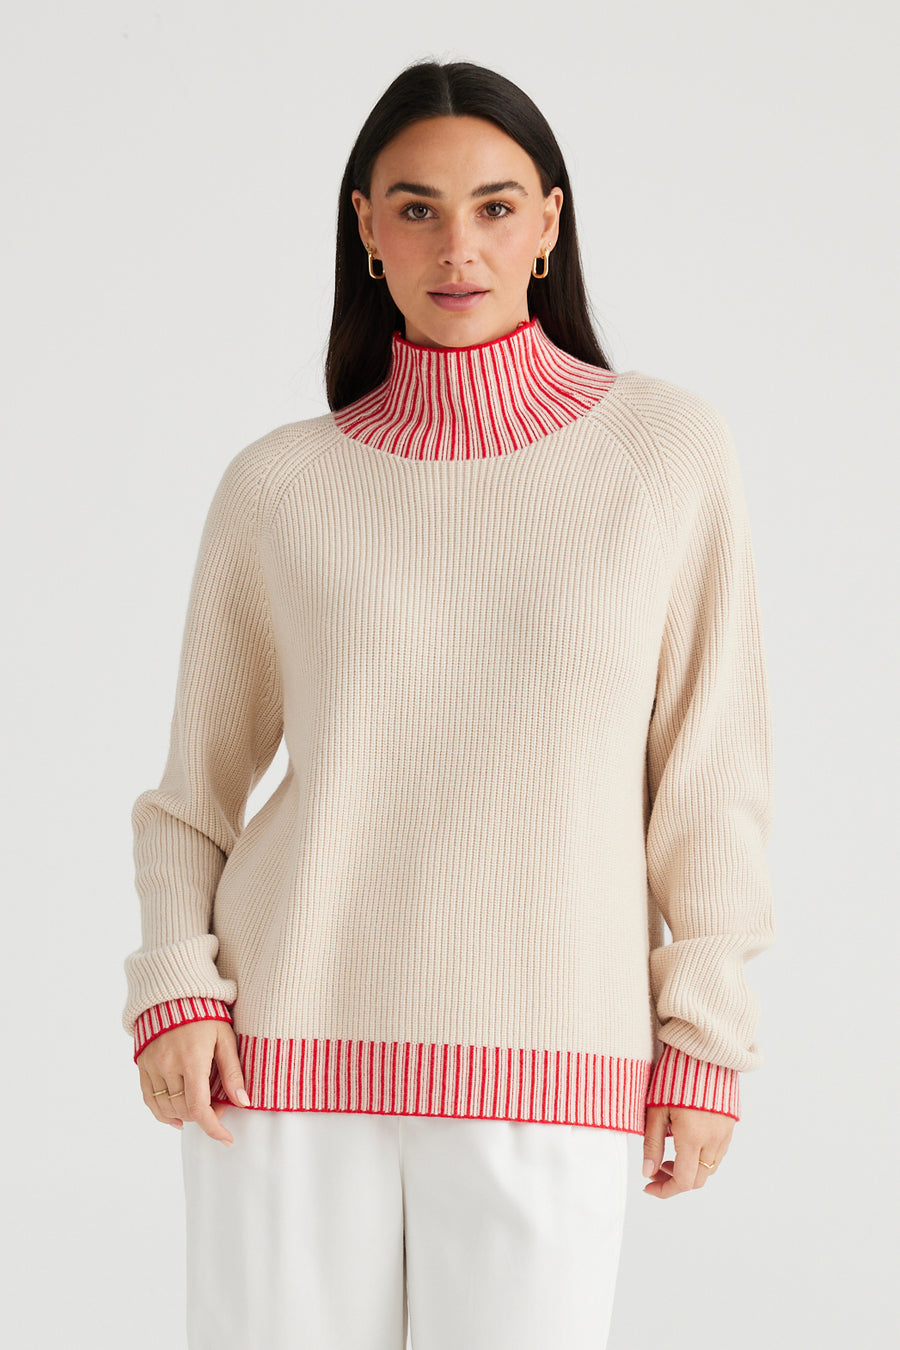 Alexis Knit Jumper - Red